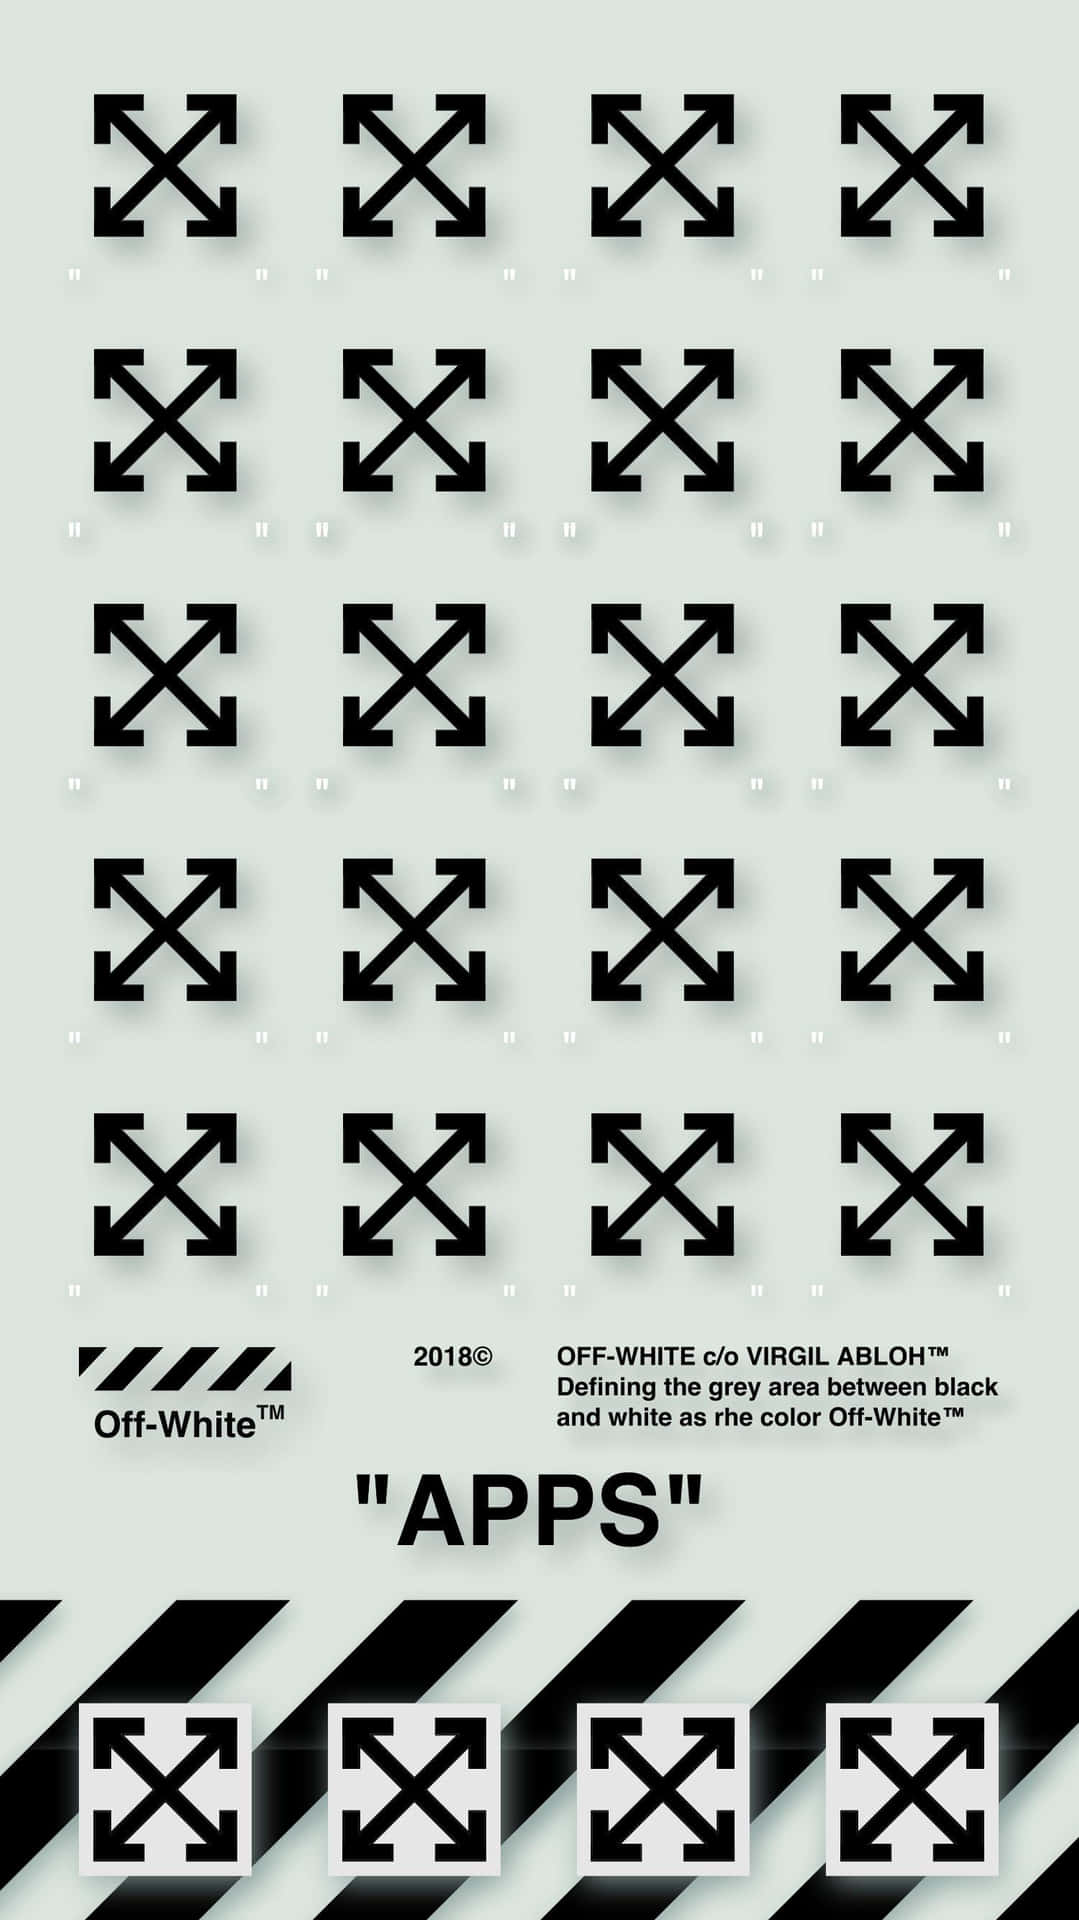 A Poster With A Black And White Design Of Arrows Wallpaper